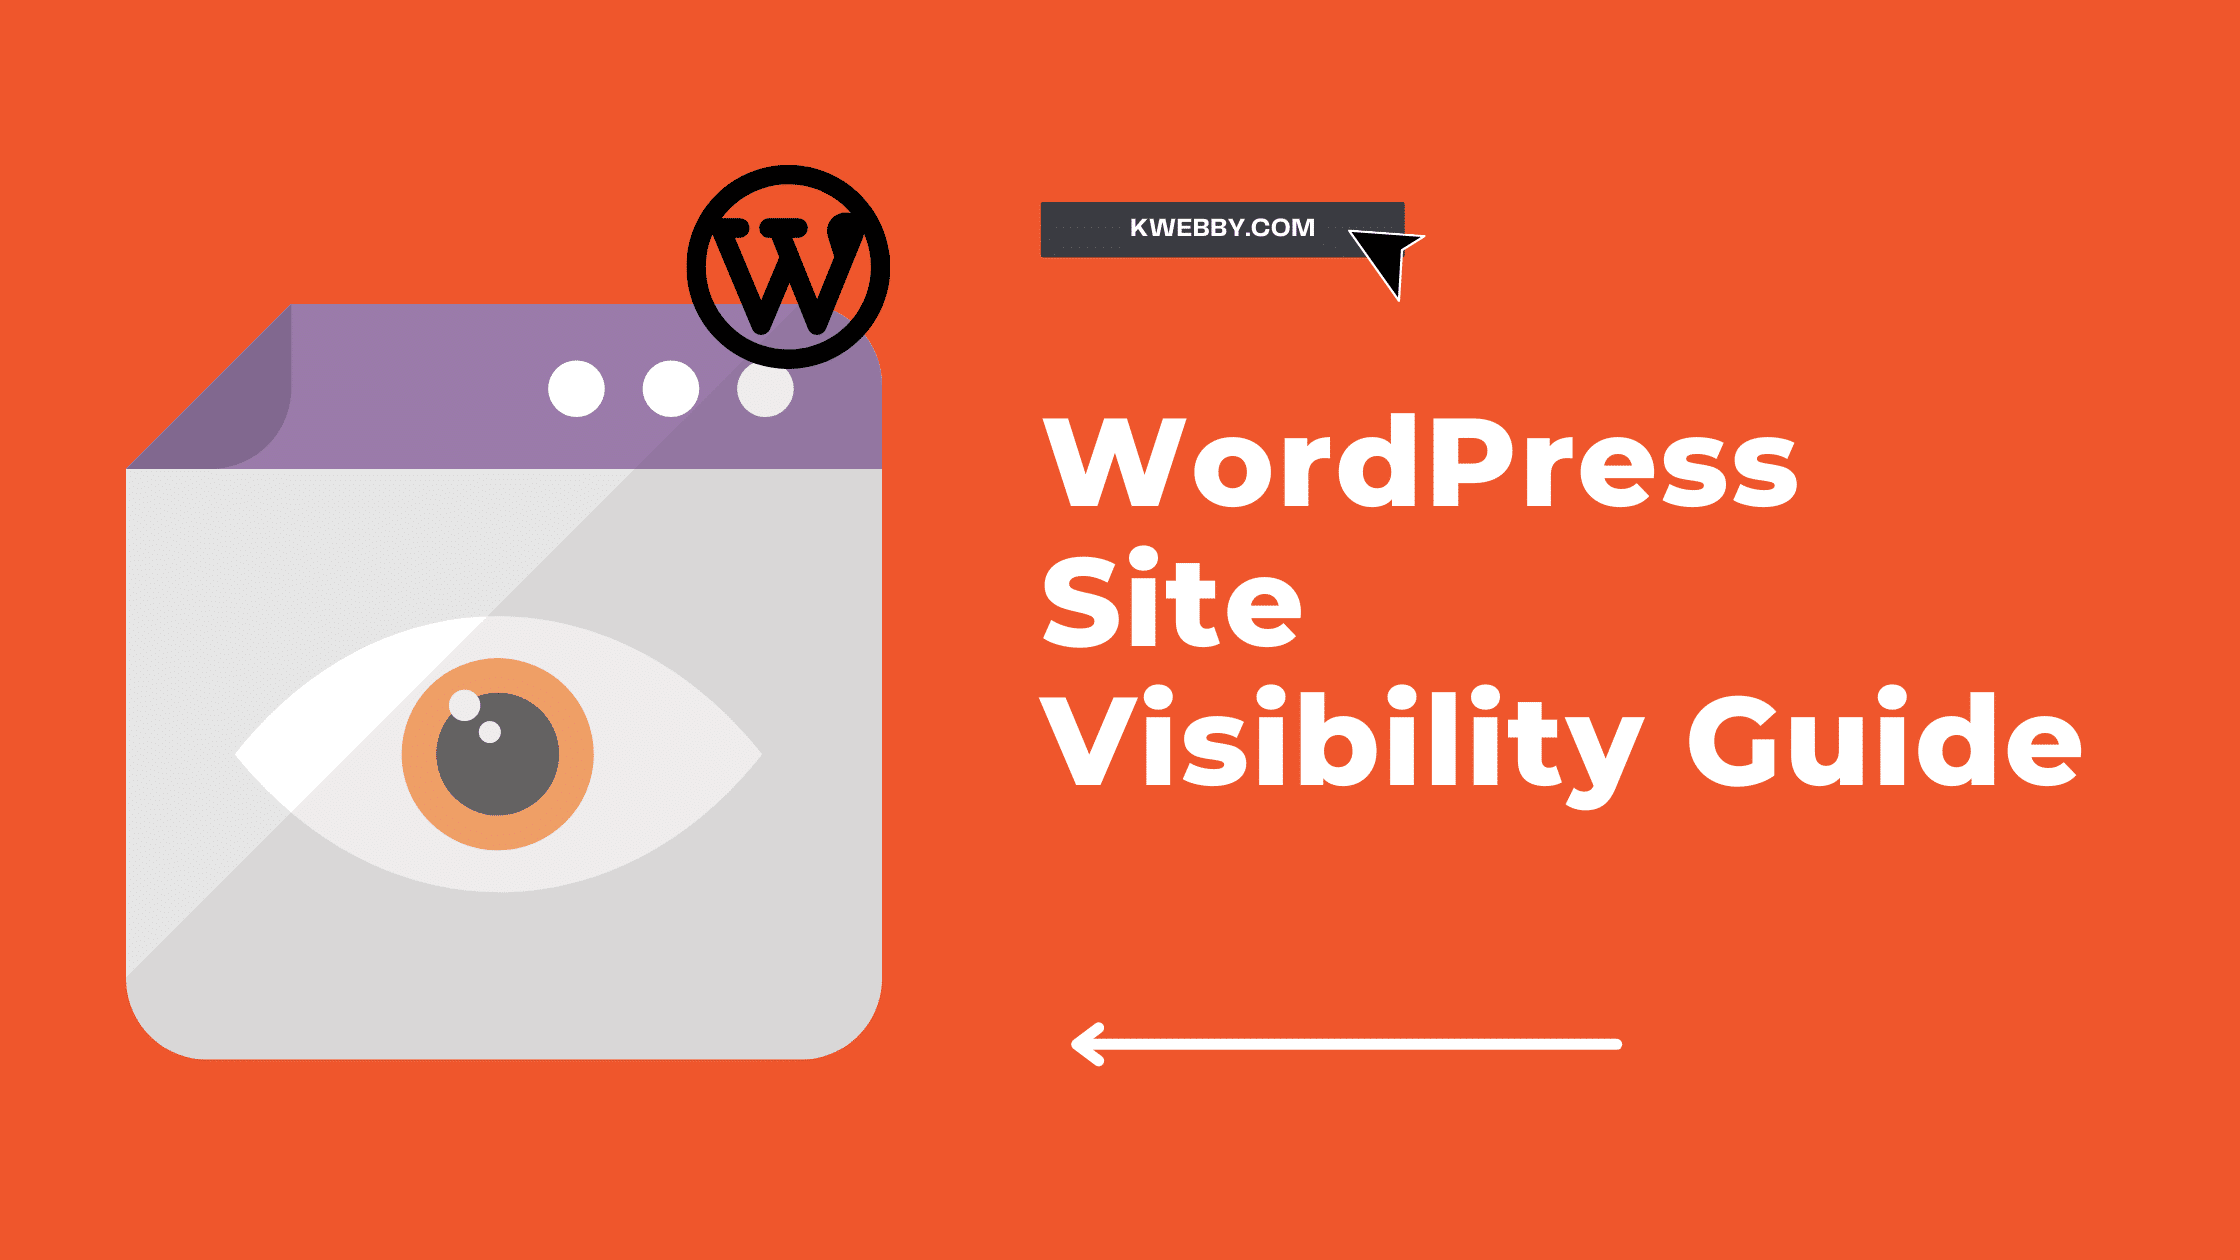 How to Make My WordPress Site Visible on Google Search in 7 Proven Ways